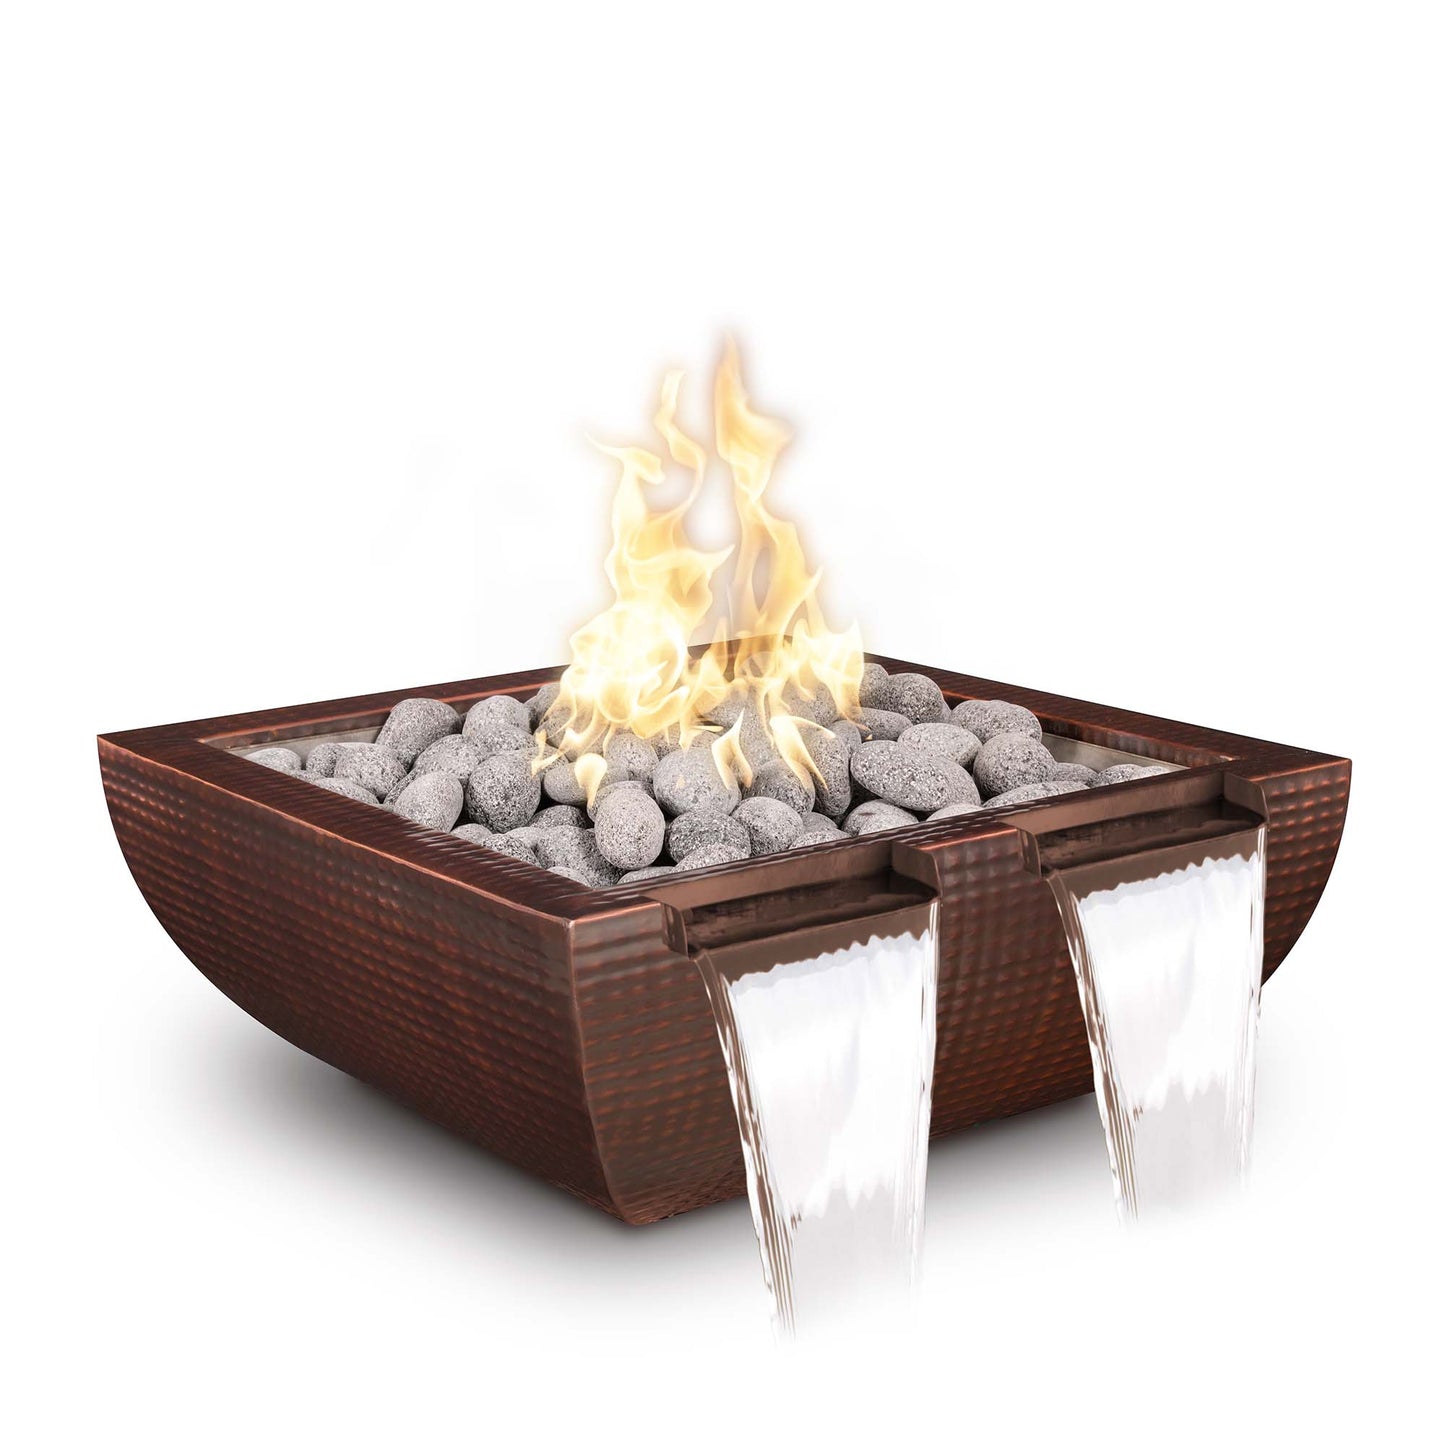 The Outdoor Plus Avalon Twin Spill 24" Pewter Powder Coated Metal Liquid Propane Fire & Water Bowl with Match Lit with Flame Sense Ignition